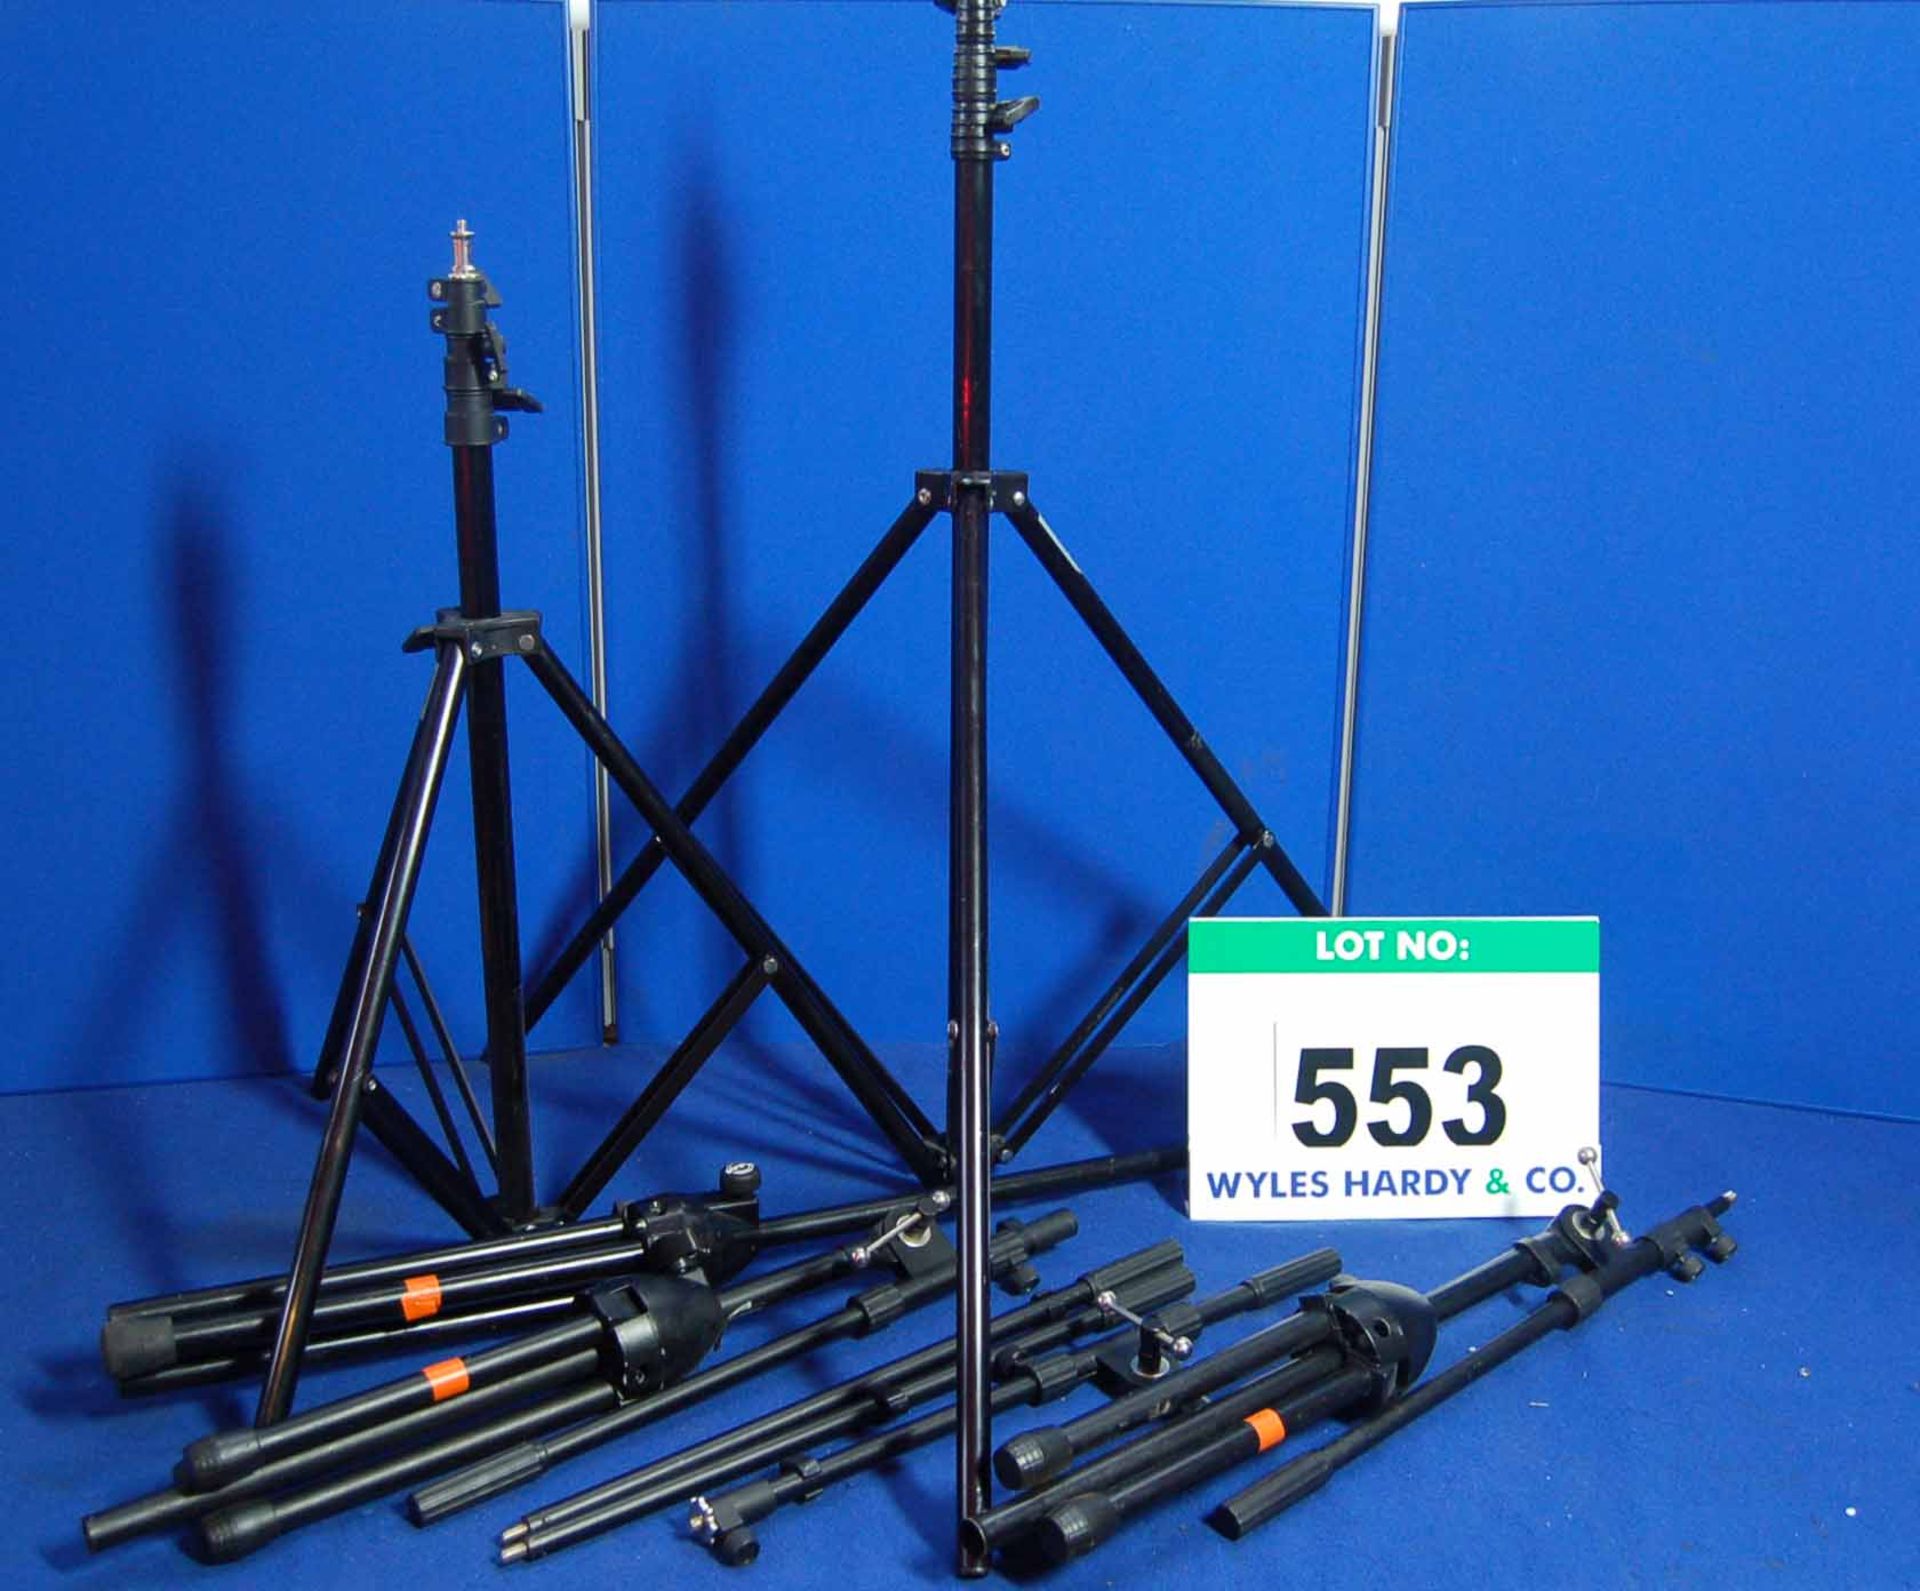 Two Light Stands & Three Microphone Stands in Carry Case